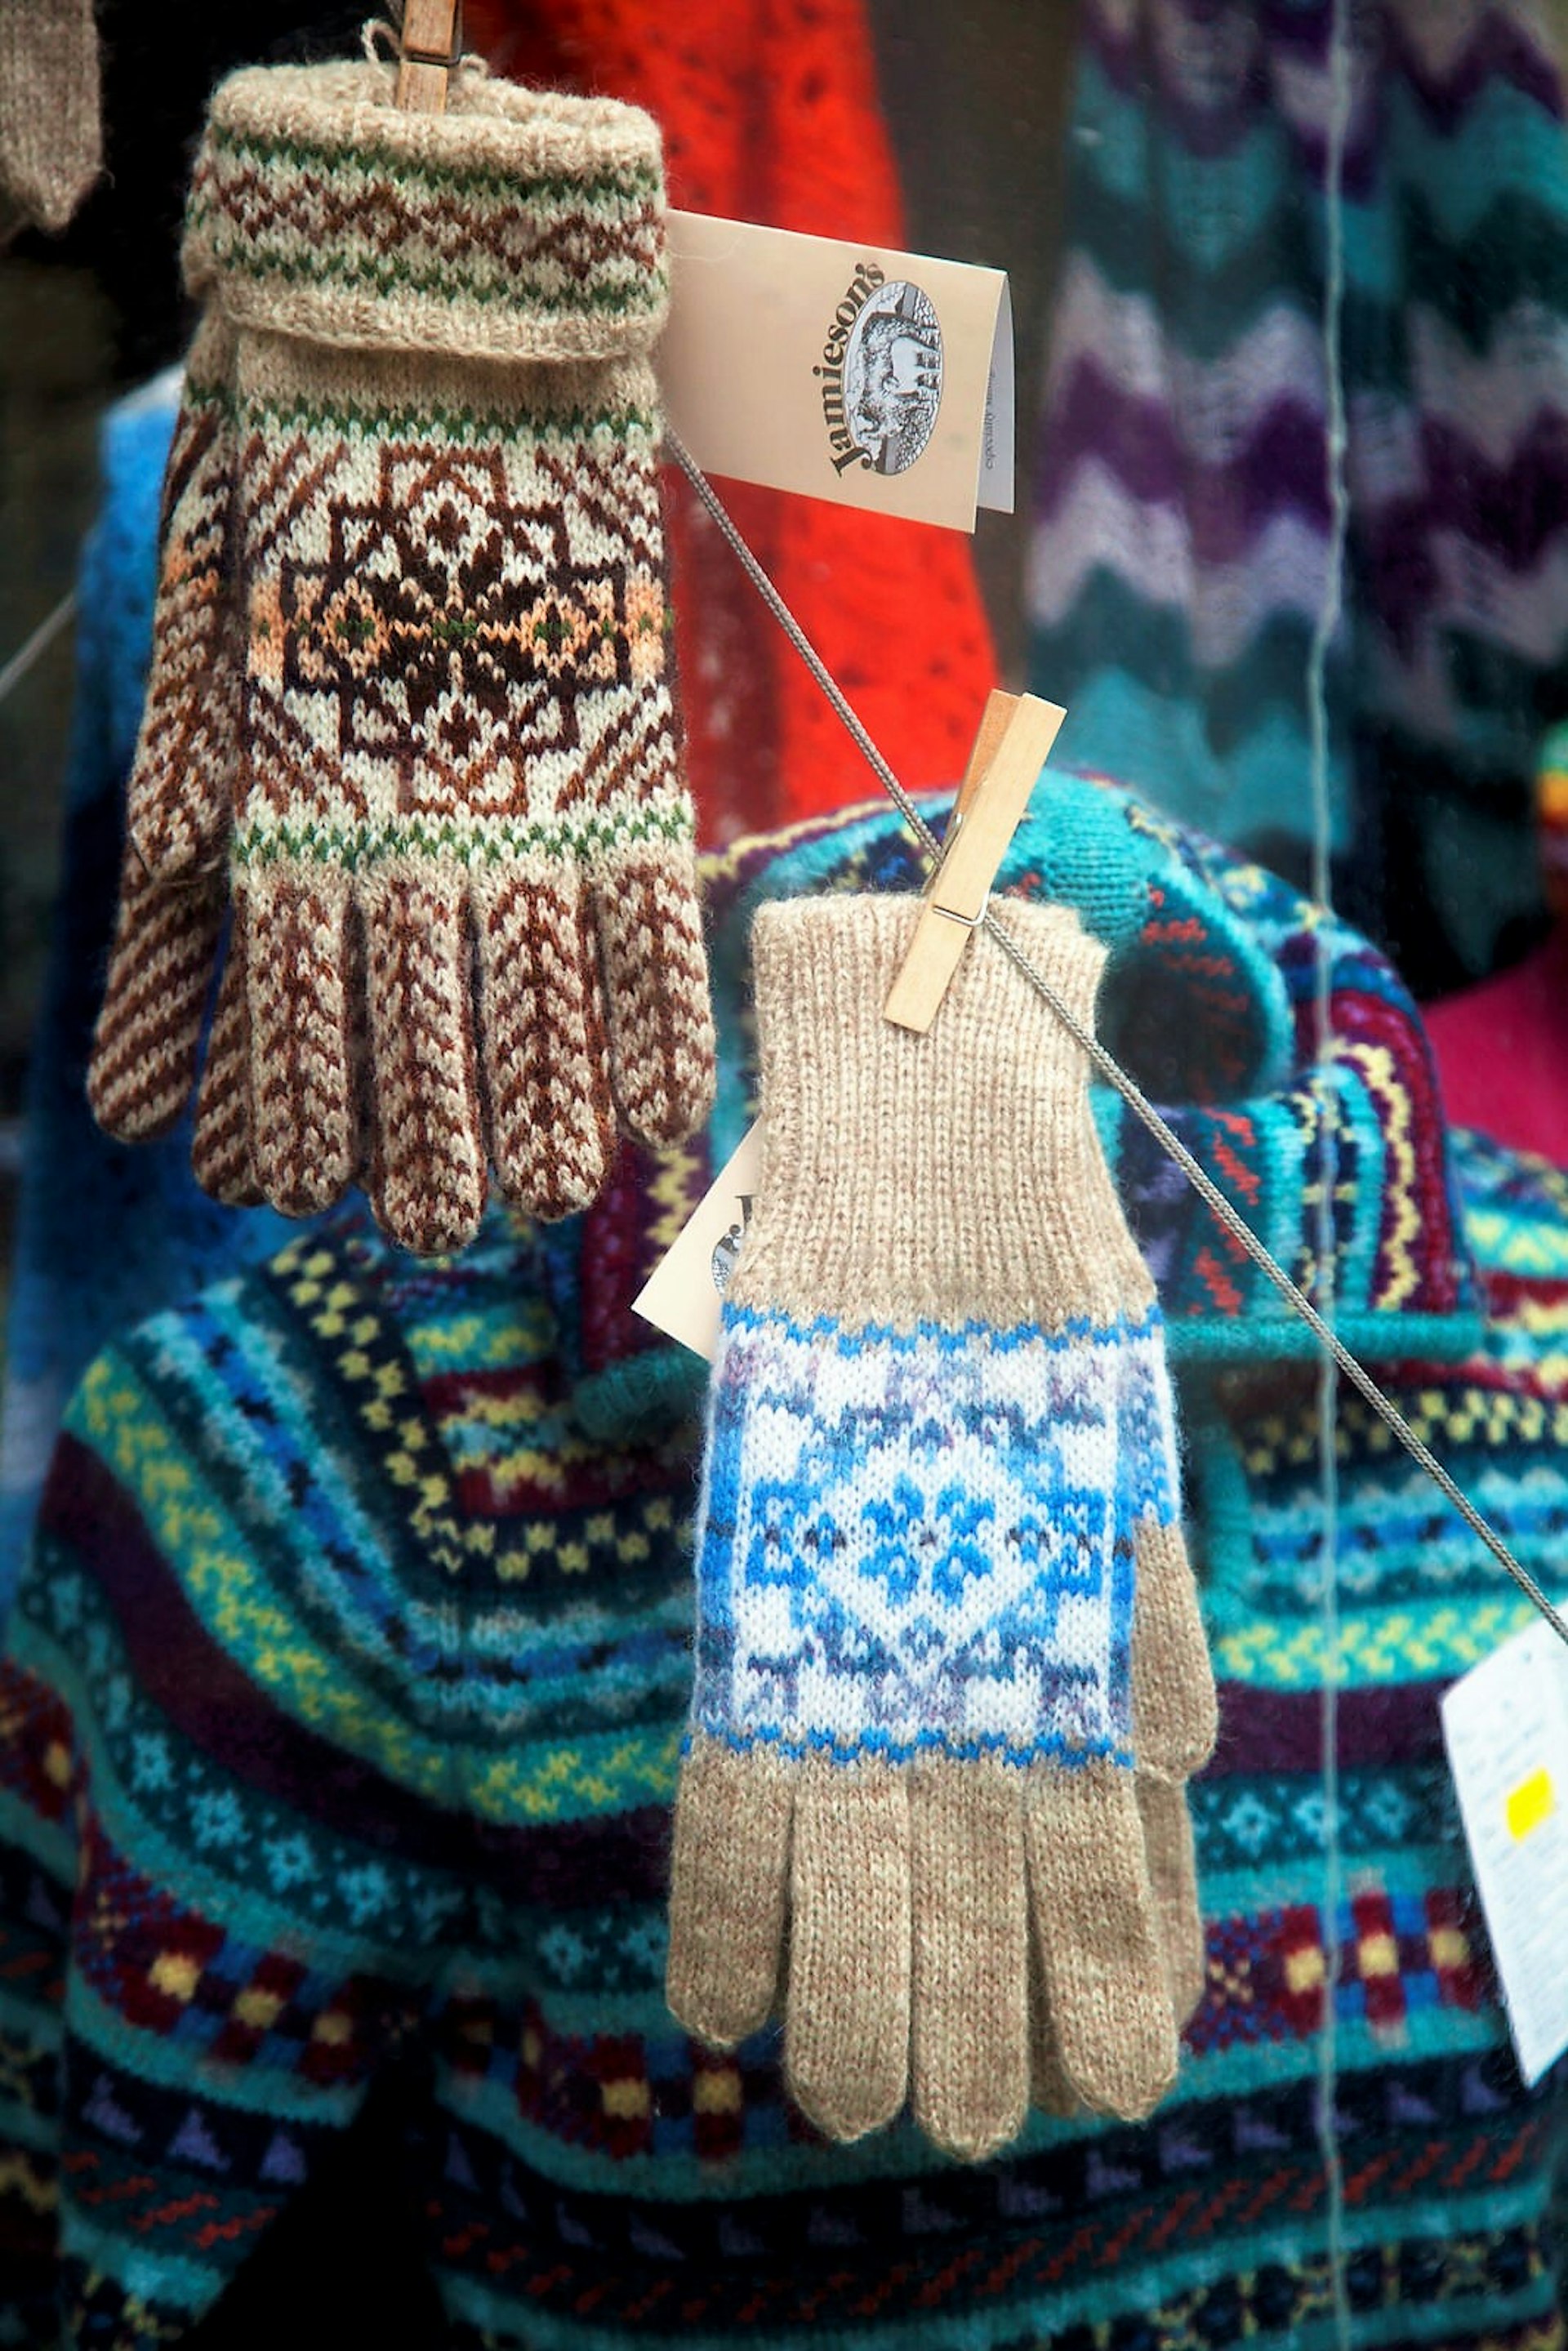 Some knitted gloves and other woollens in traditional Shetland designs